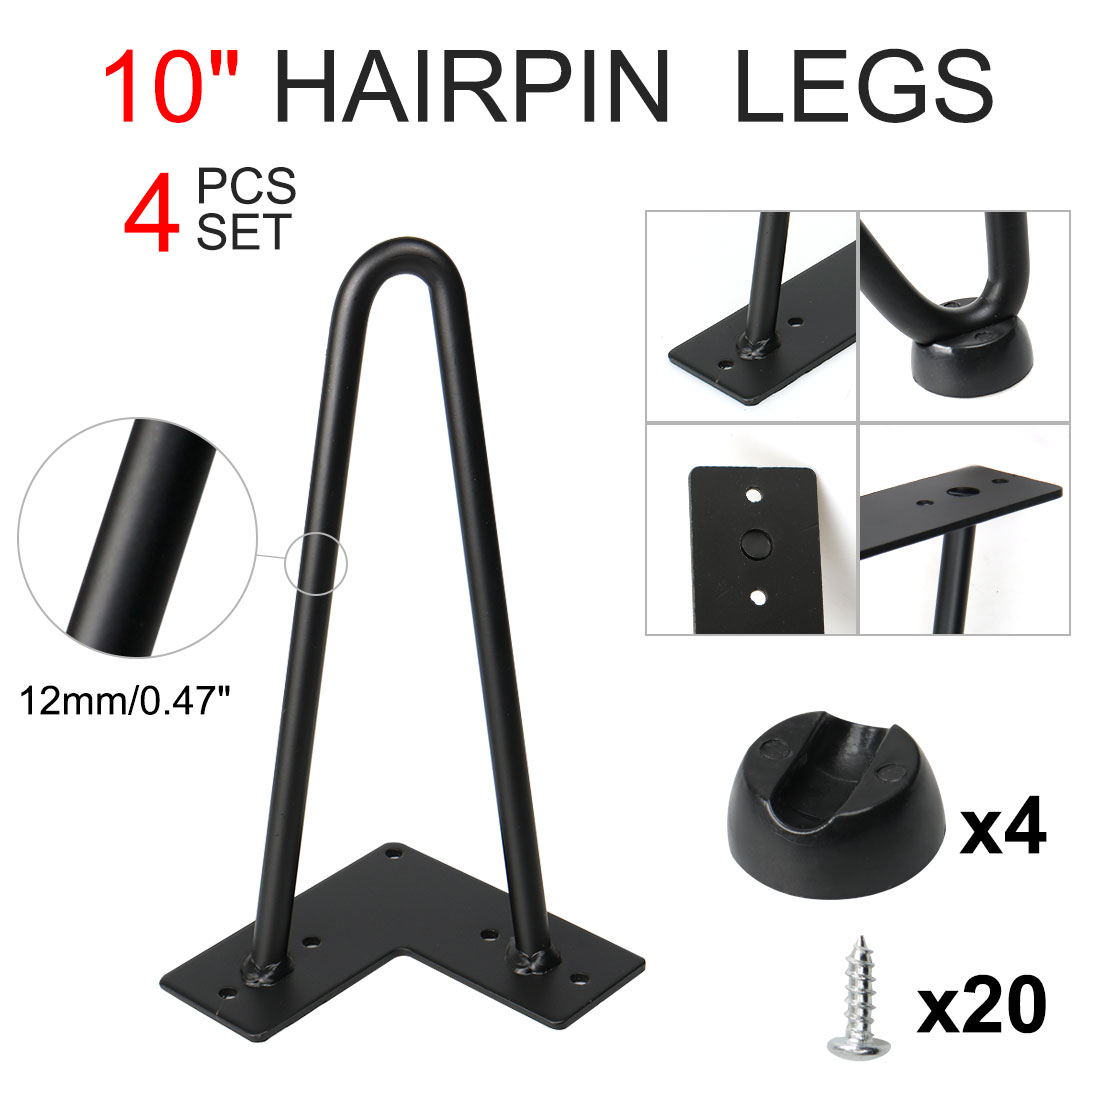 10" Hairpin Table Legs Coffee Legs DIY Iron Furniture Legs Room Furniture Accessories, 4pcs - image 5 of 7